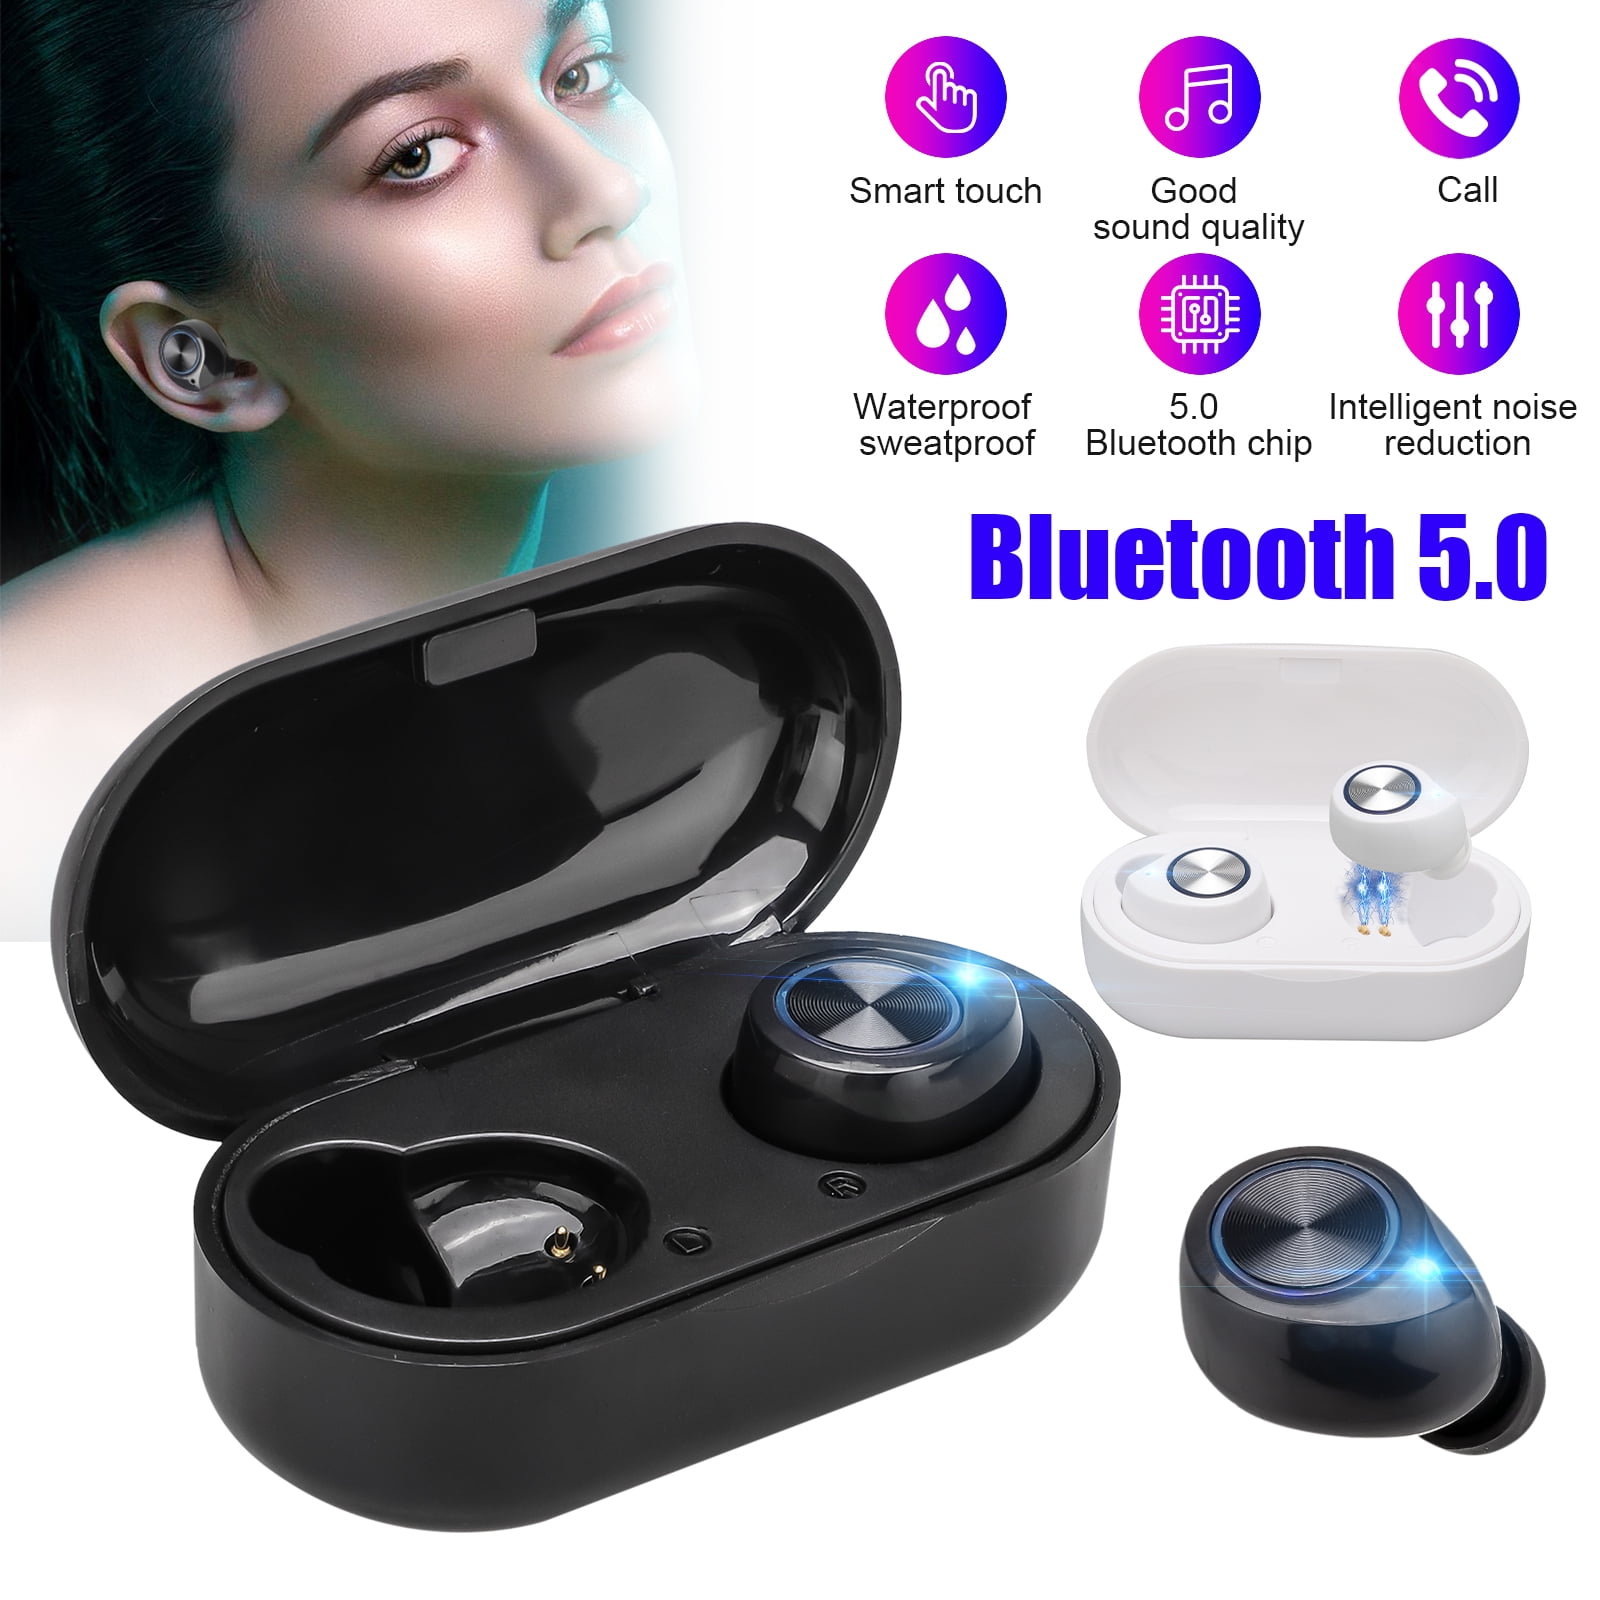 Wireless Bluetooth Earbuds, EEEKit TWS Bluetooth 5.0 HiFi Stereo Headset Handsfree Call Sport Earbuds with Built-in HD Mic and Charging Case Compatible with iPhone Samsung Huawei Android